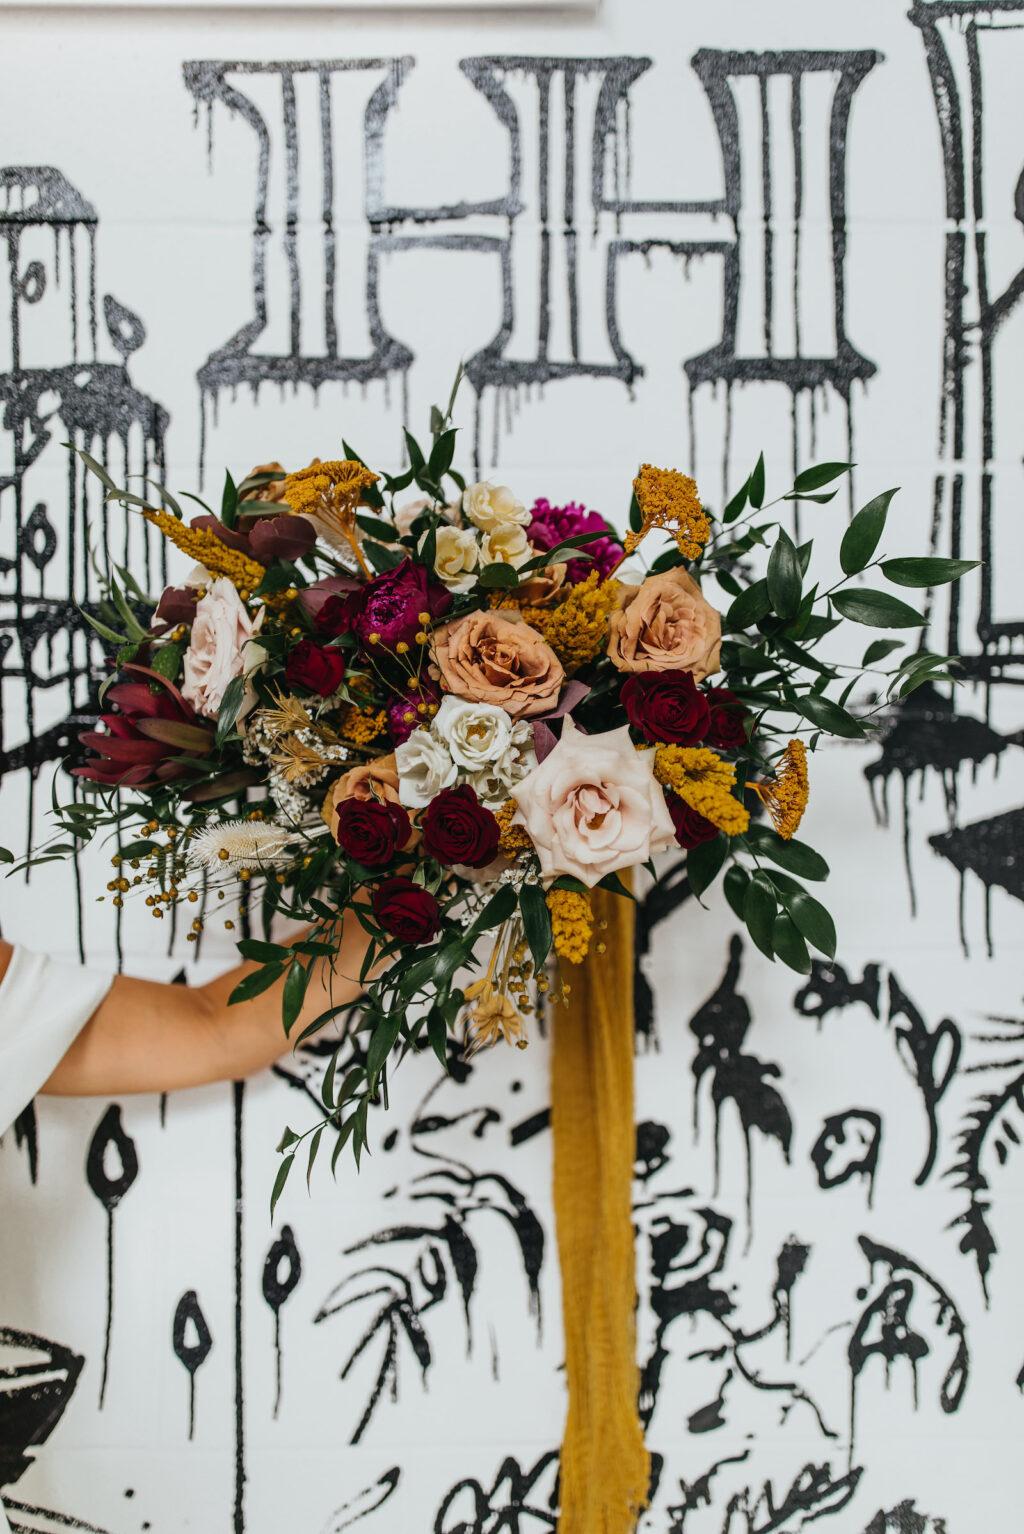 Modern and Edgy Fall Wedding, Bride Holding Wild Blush Pink, Burgundy Red Roses, Yellow Flowers and Greenery Bouquet with Mustard Yellow Hanging Linen, Black and White Graffiti Wall | South Tampa Wedding Venue Hyde House